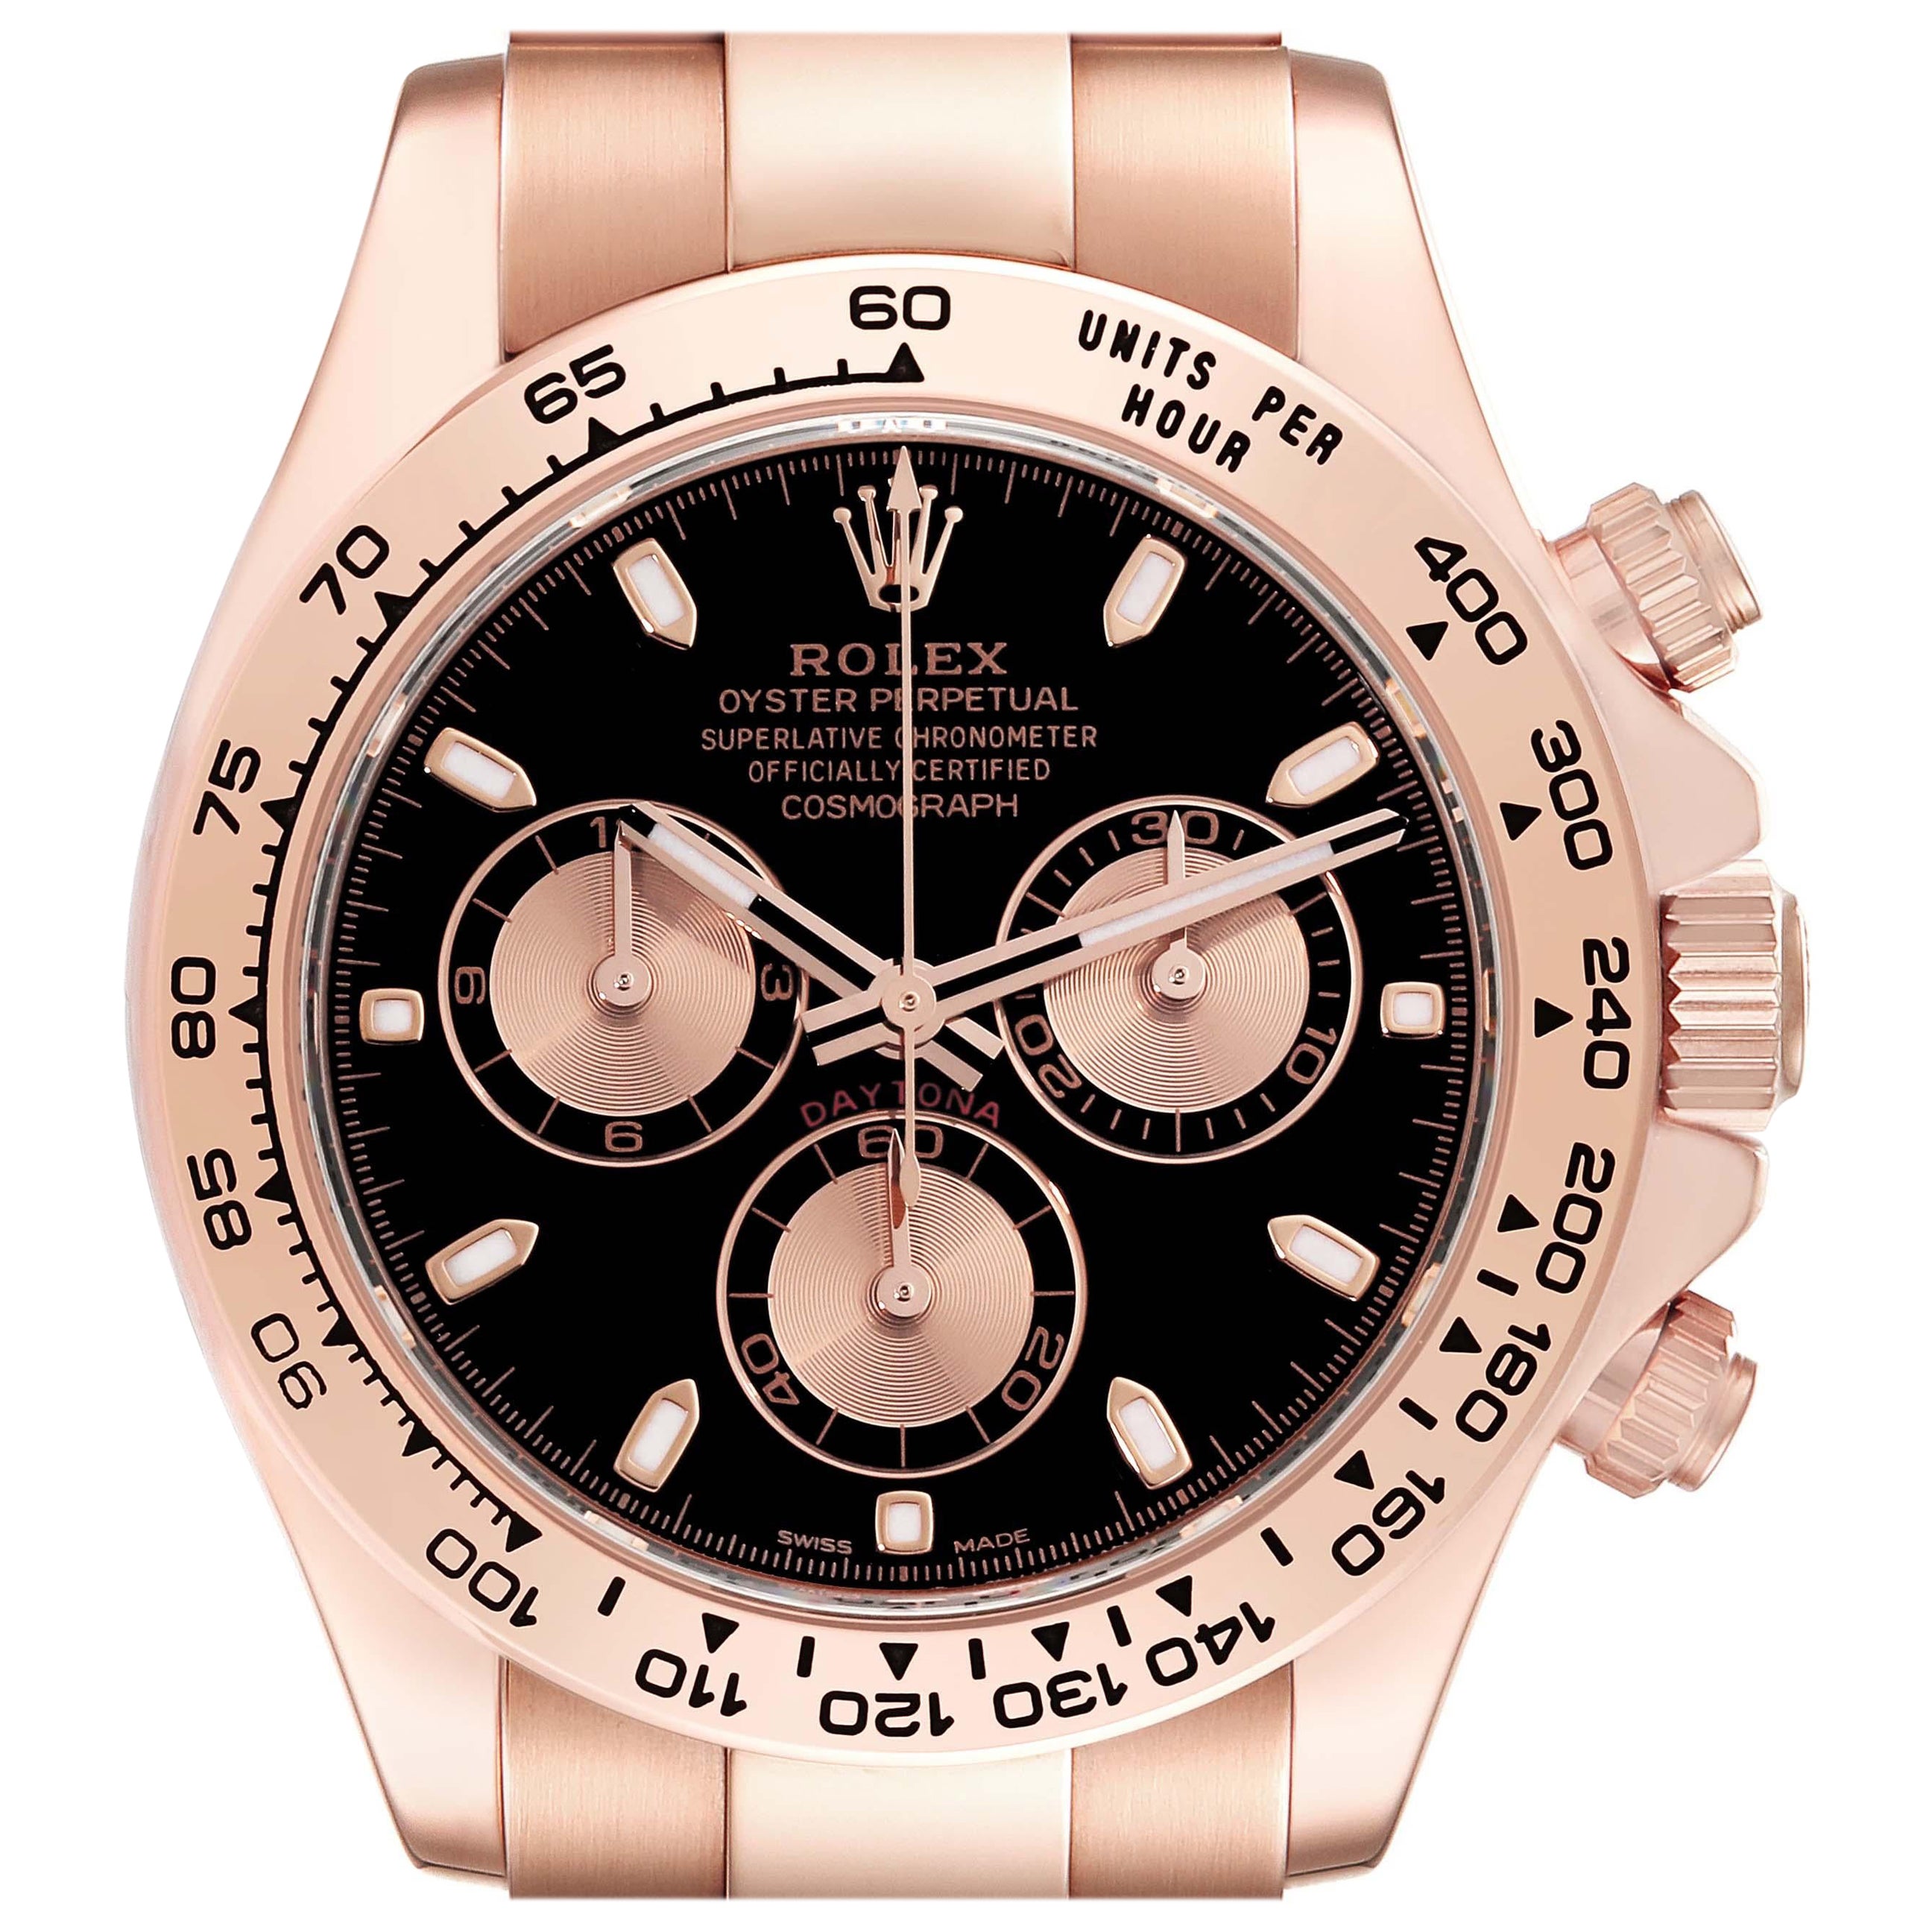 Is the Rolex Daytona discontinued?